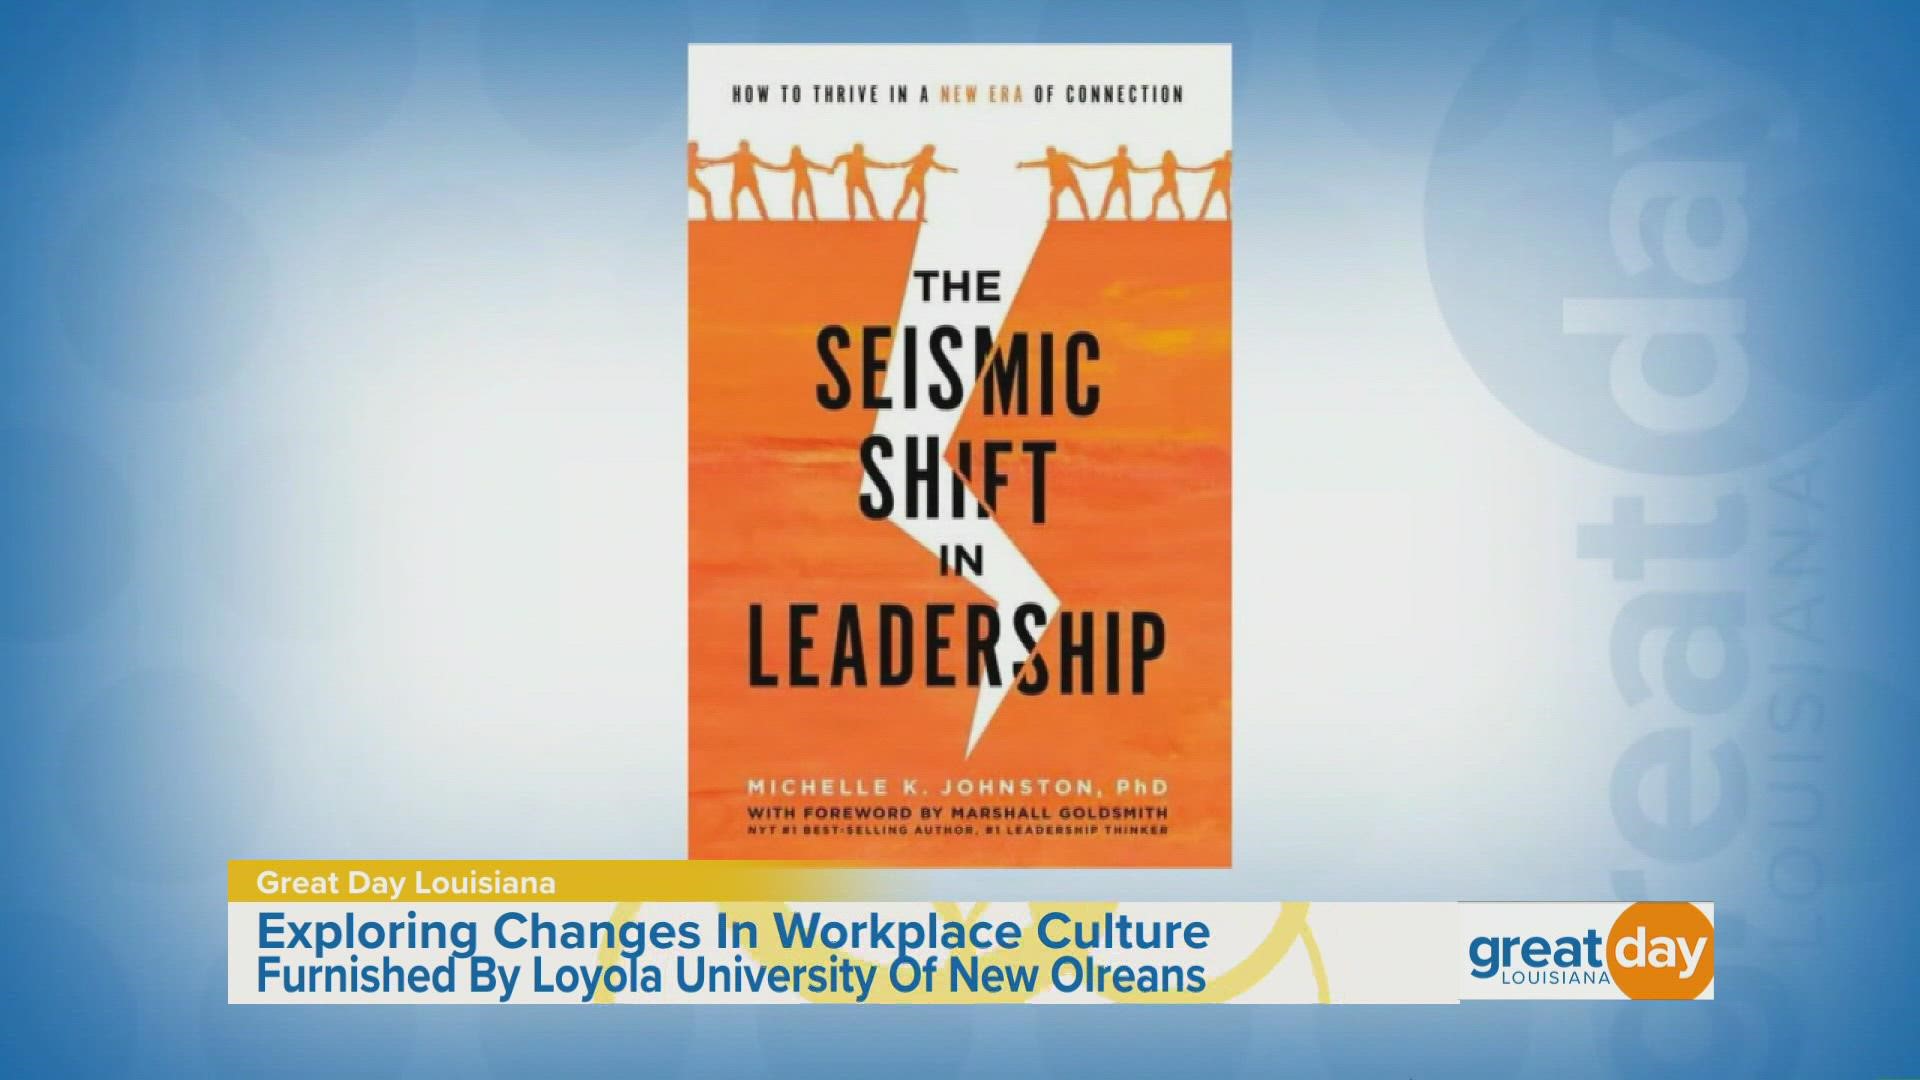 The Loyola University School of Business chair discussed her new book which takes a look at how leadership has changed.